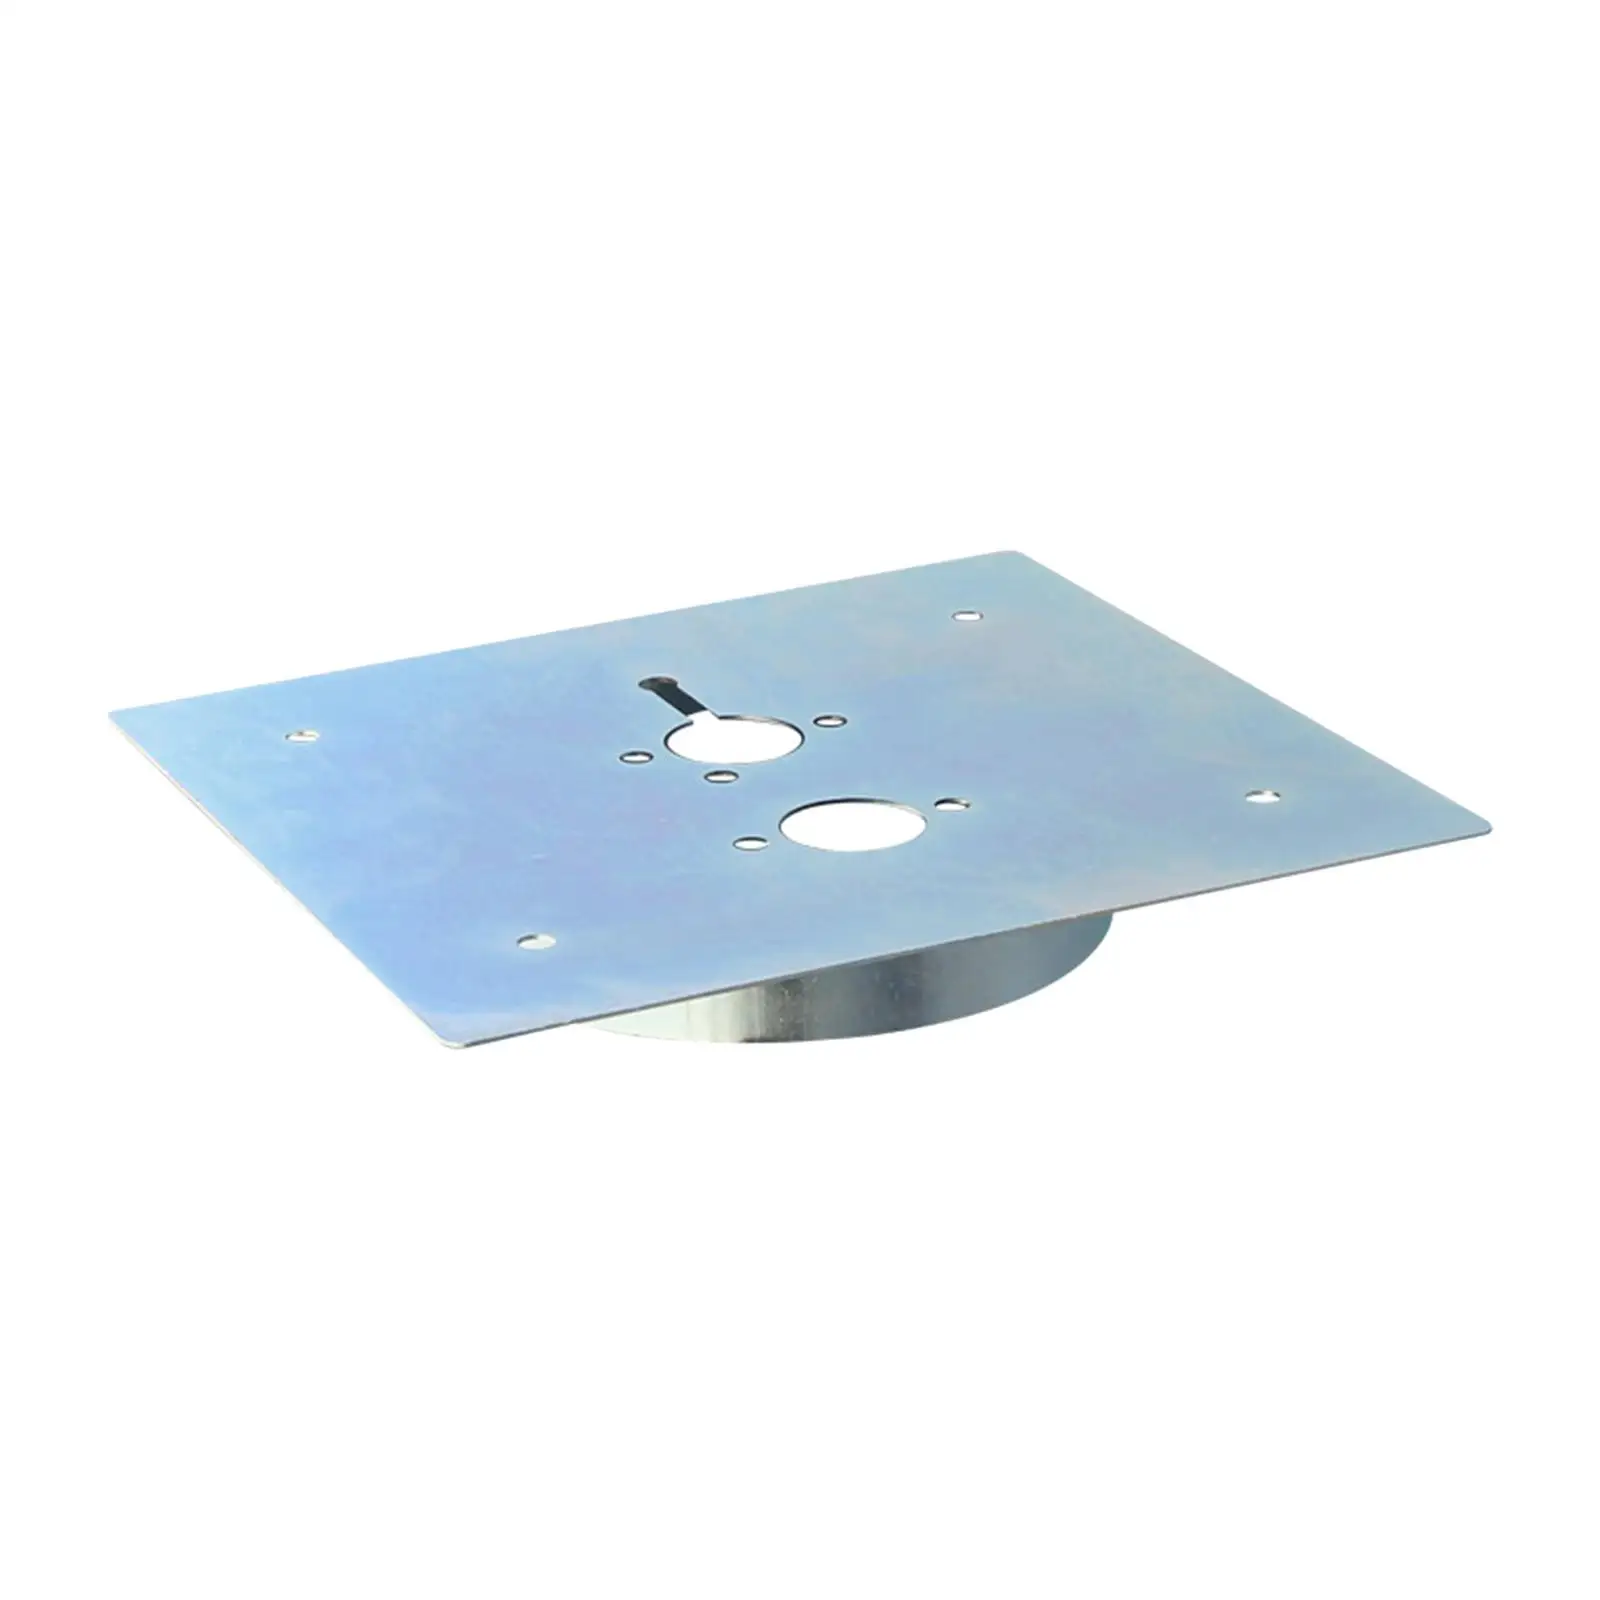 Diesel Heater Mounting Plate Replaces Easy Installation High Performance Car Accessories Durable Spare Parts steel